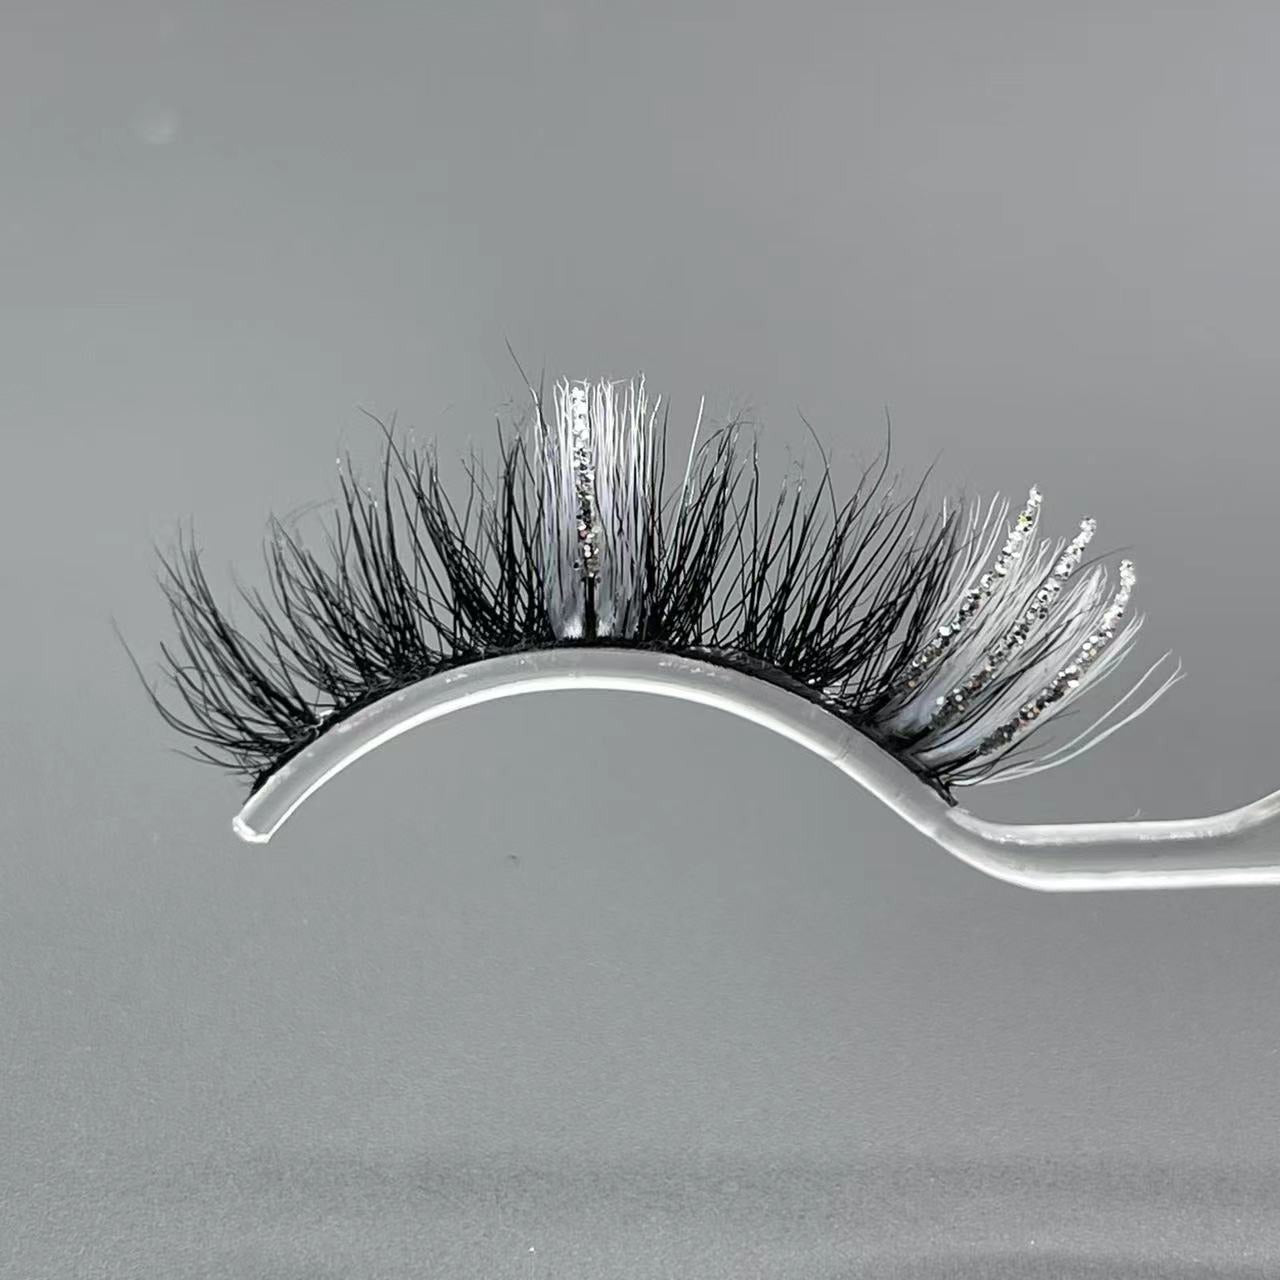 FIRE LASHES 5 pairs in 1 box.